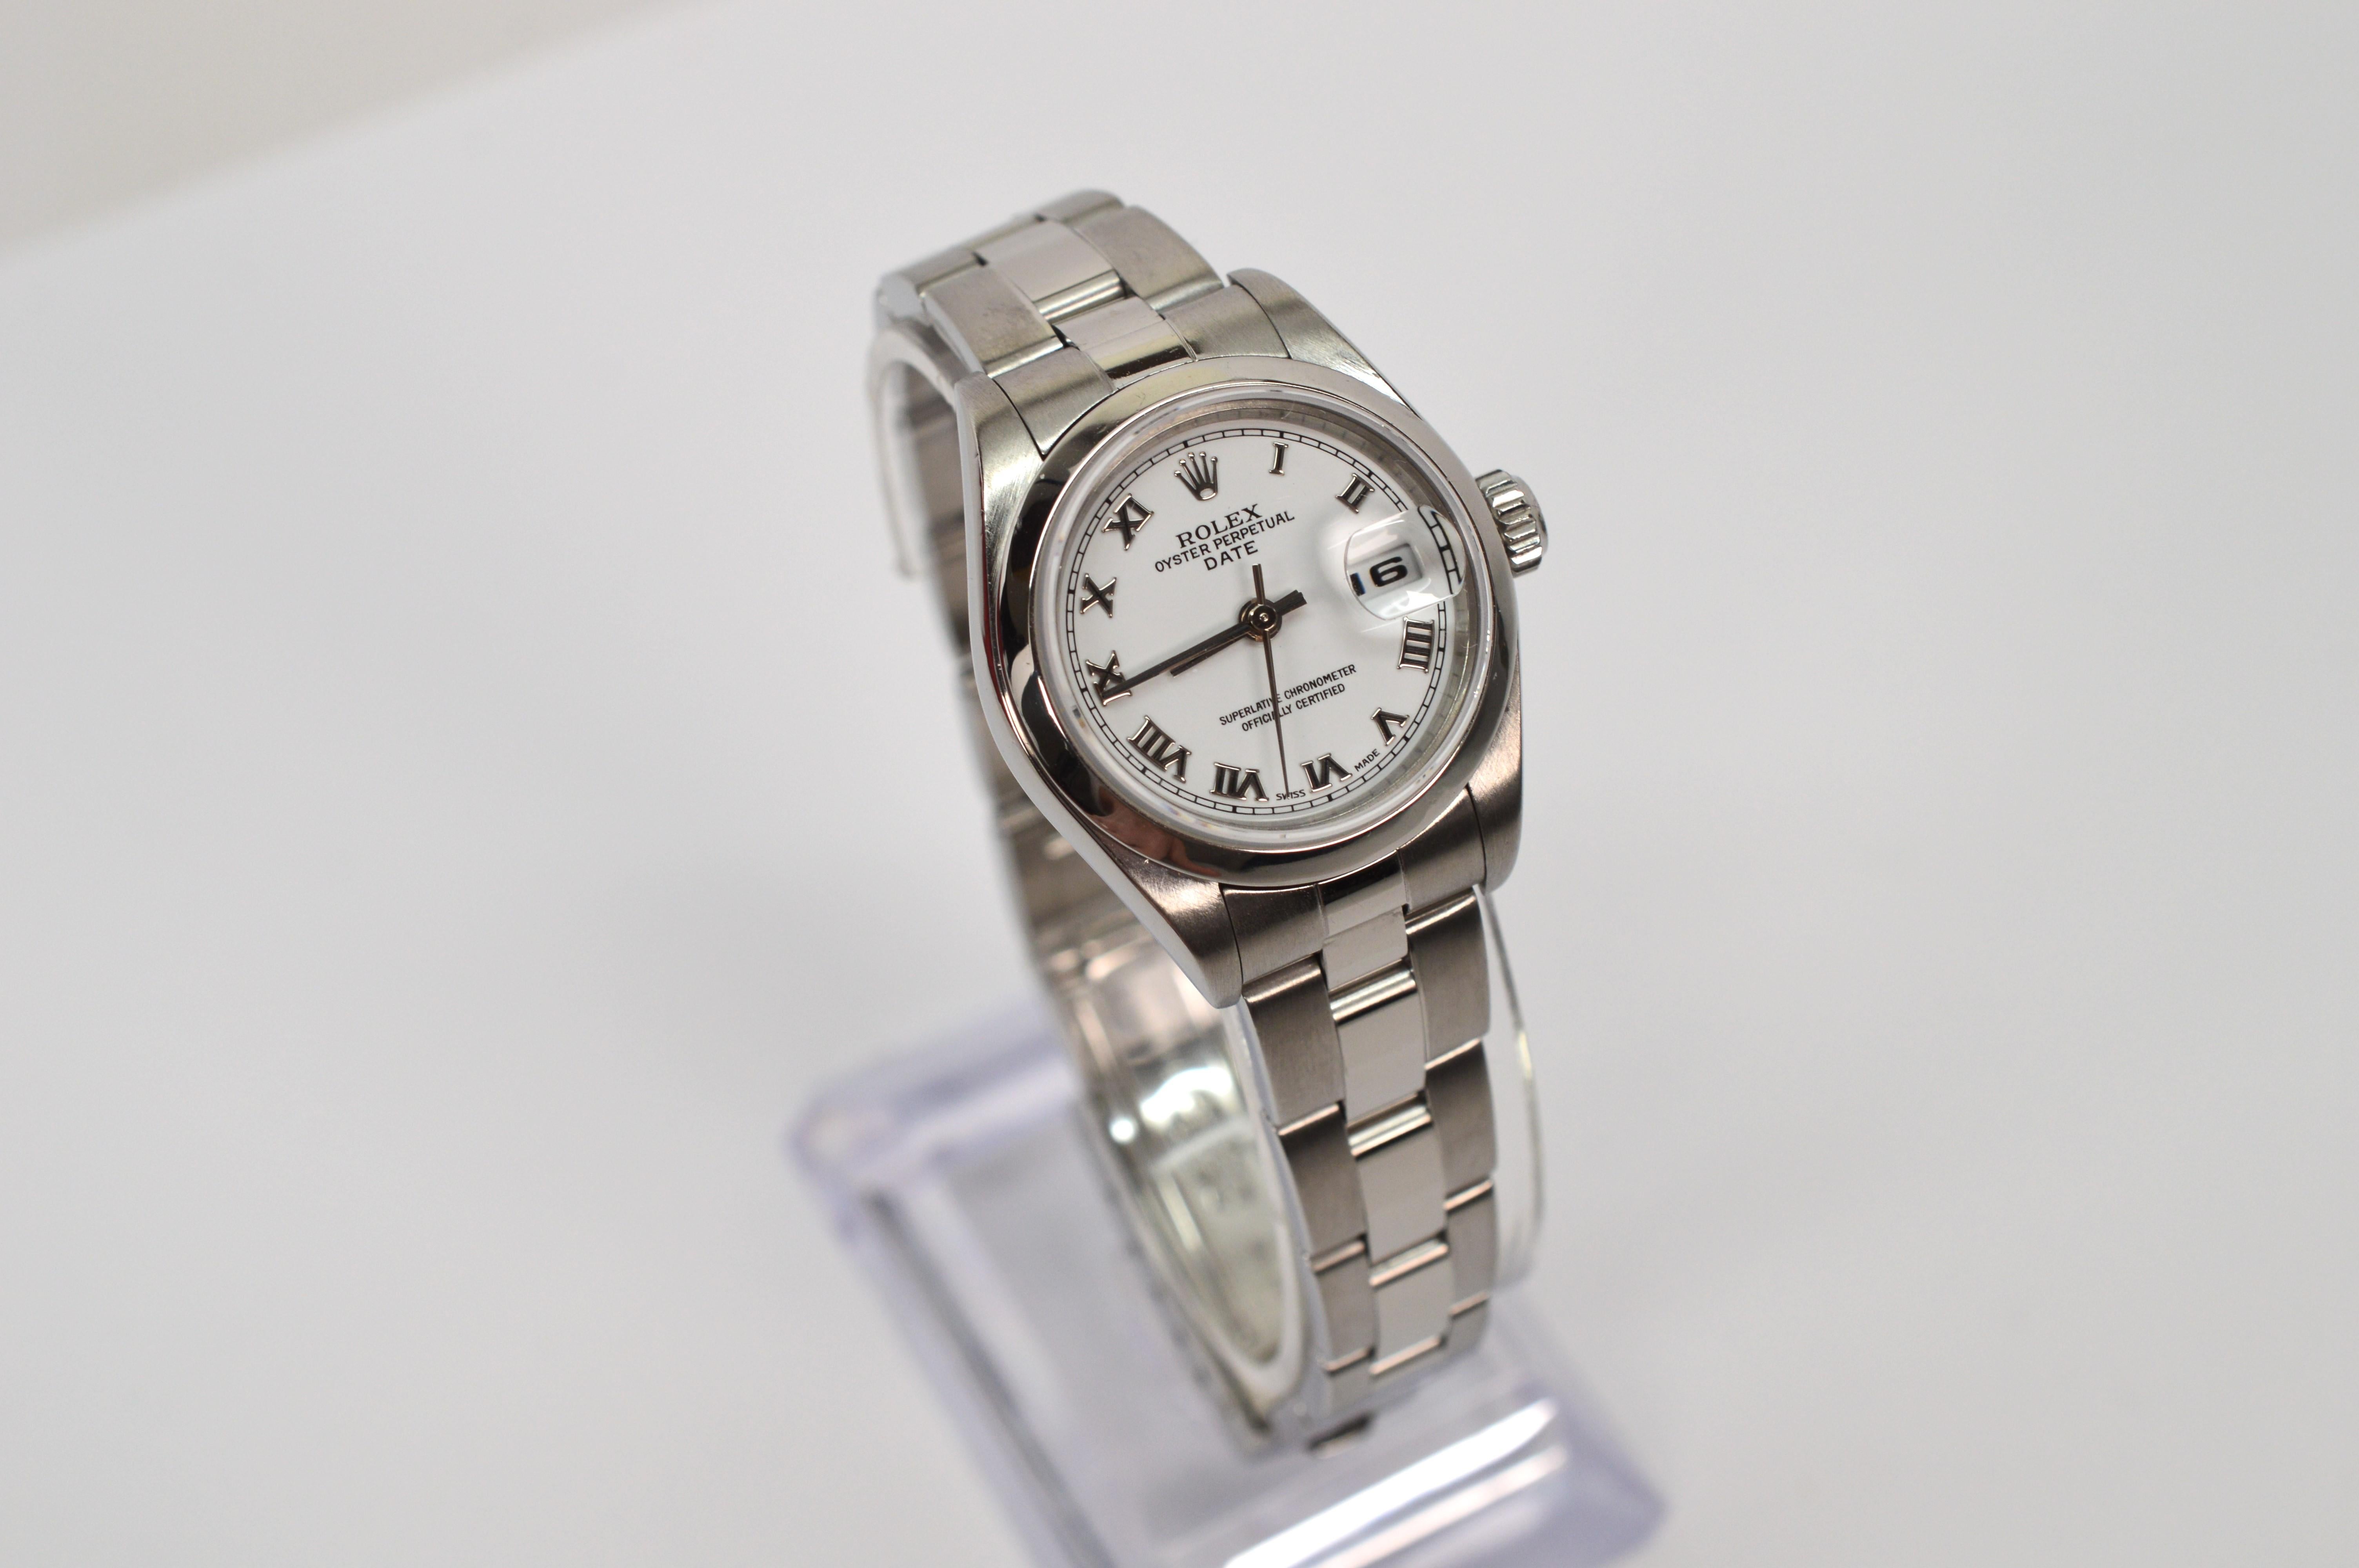 Rolex Oyster Perpetual Date 79160 Stainless Steel Women's Wrist Watch In Excellent Condition For Sale In Mount Kisco, NY